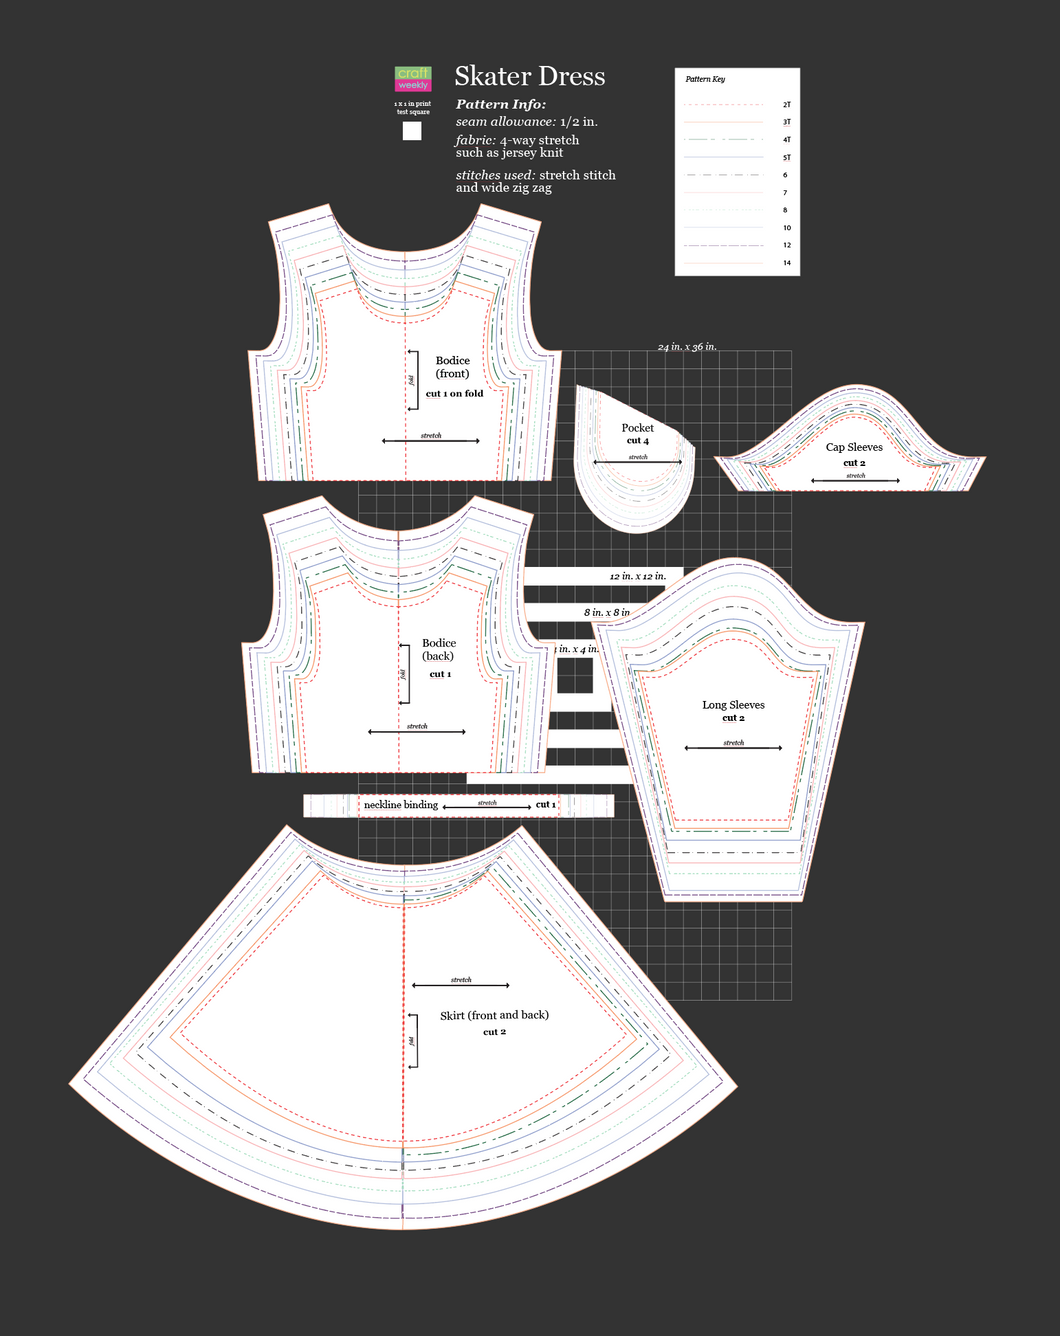 BETA Projector Skater Dress Sewing Pattern for Kids - sizes 2T-14